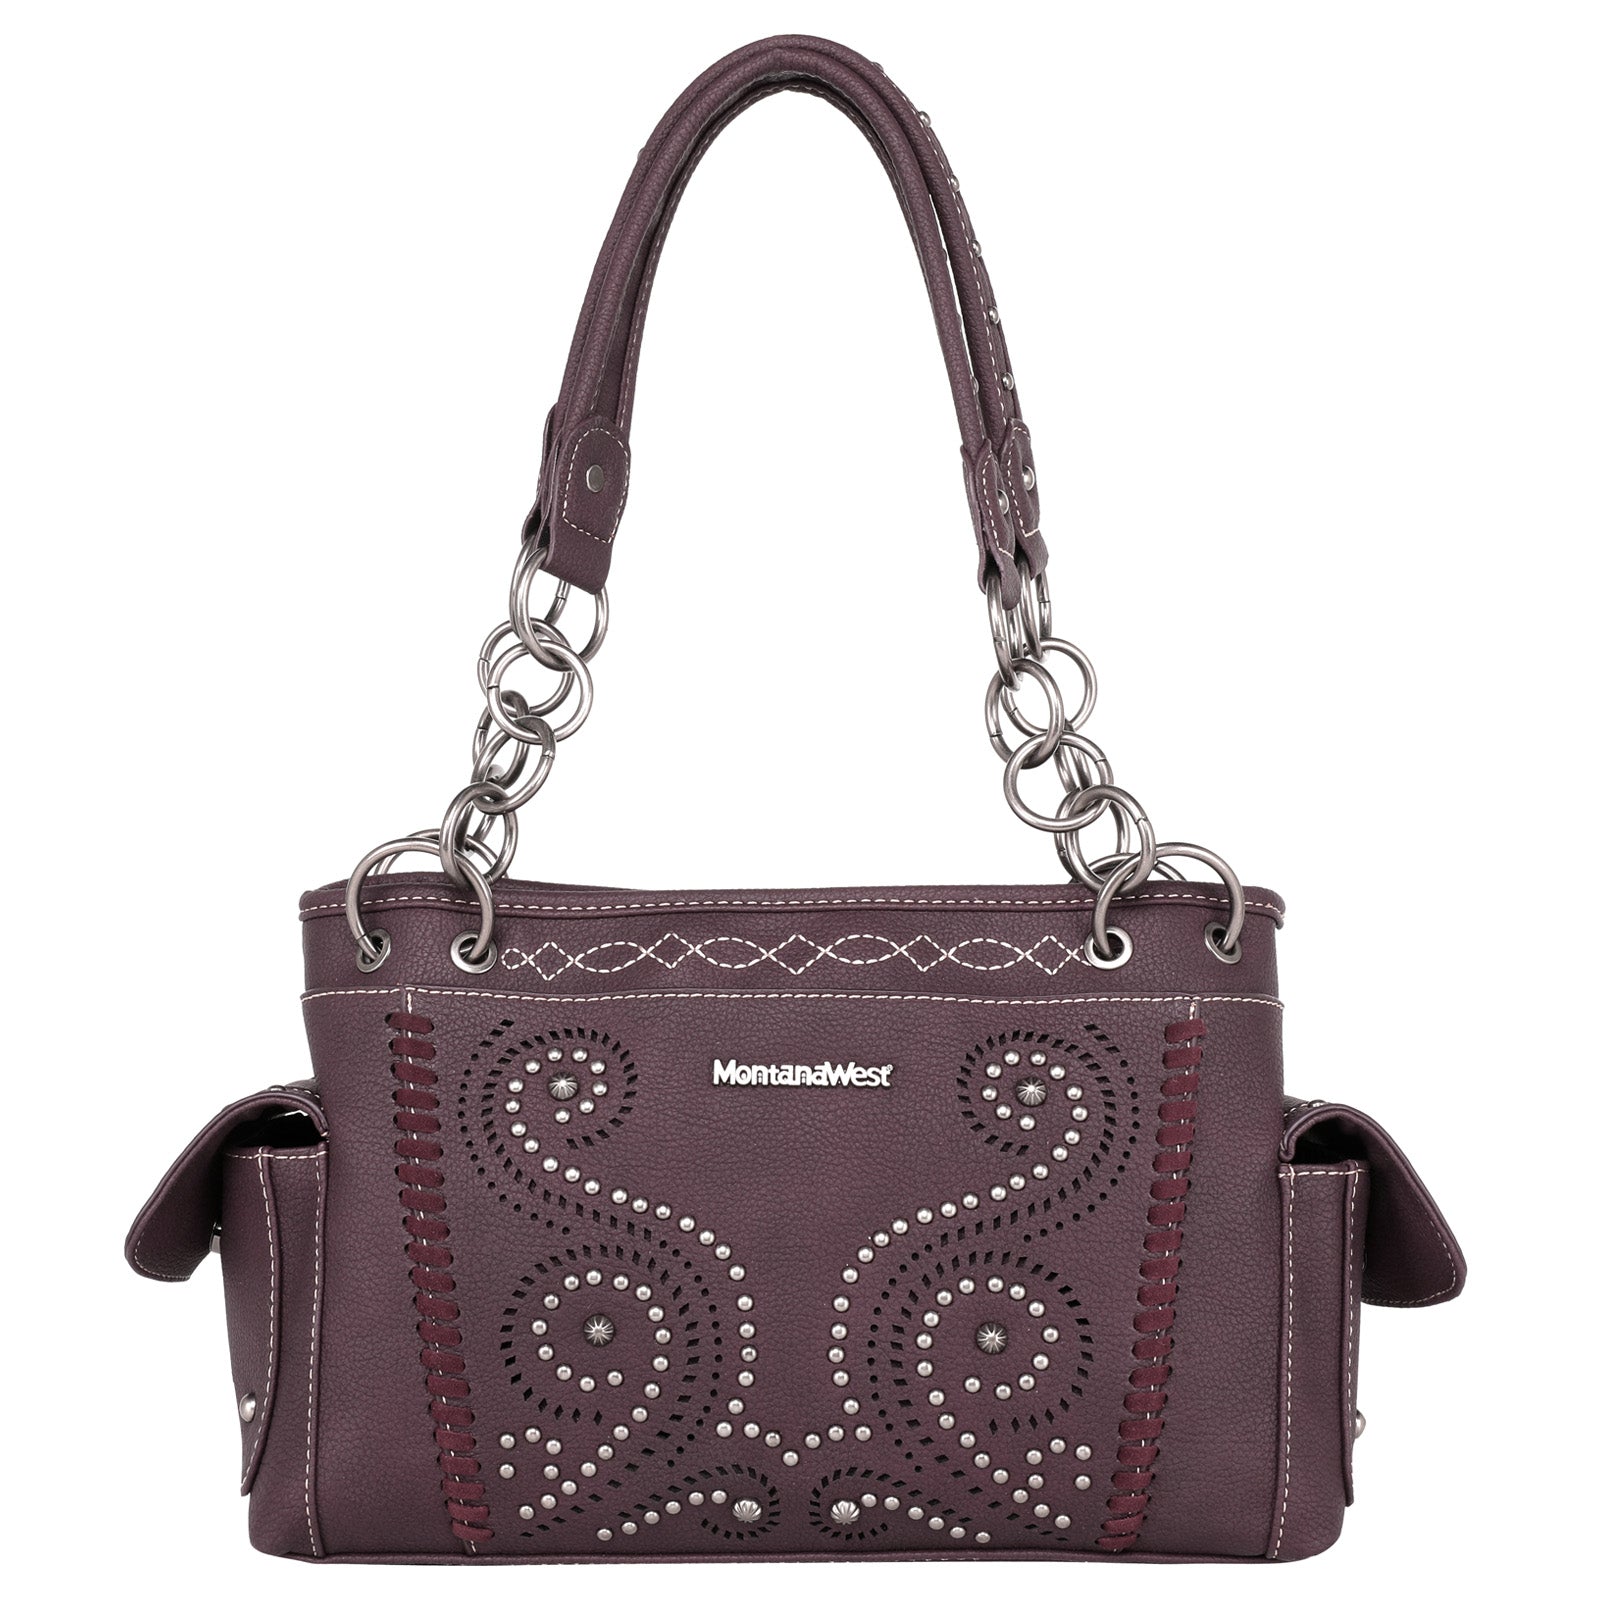 Montana West Laser Cut-out Swirl Concealed Carry Satchel